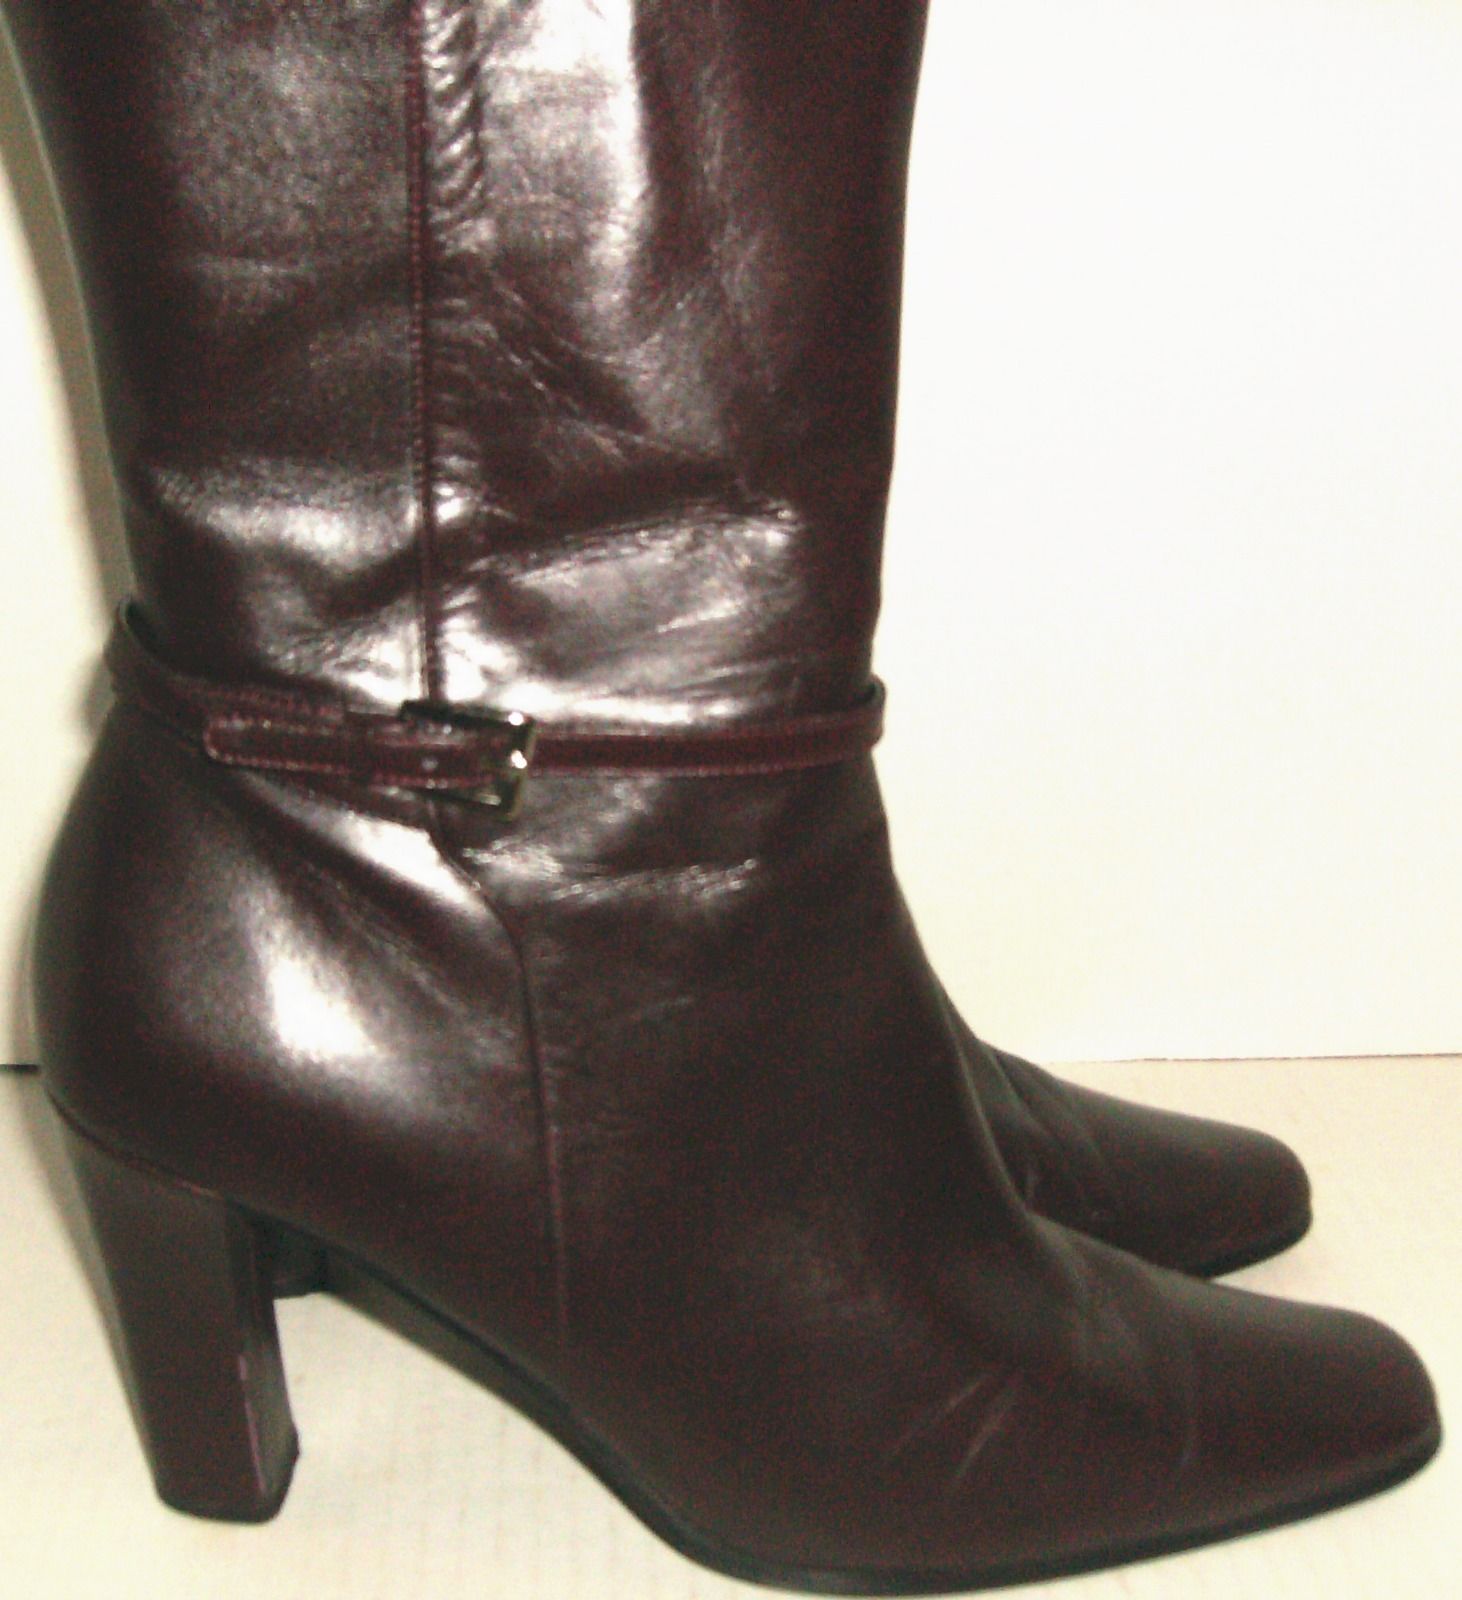 m and s boots women